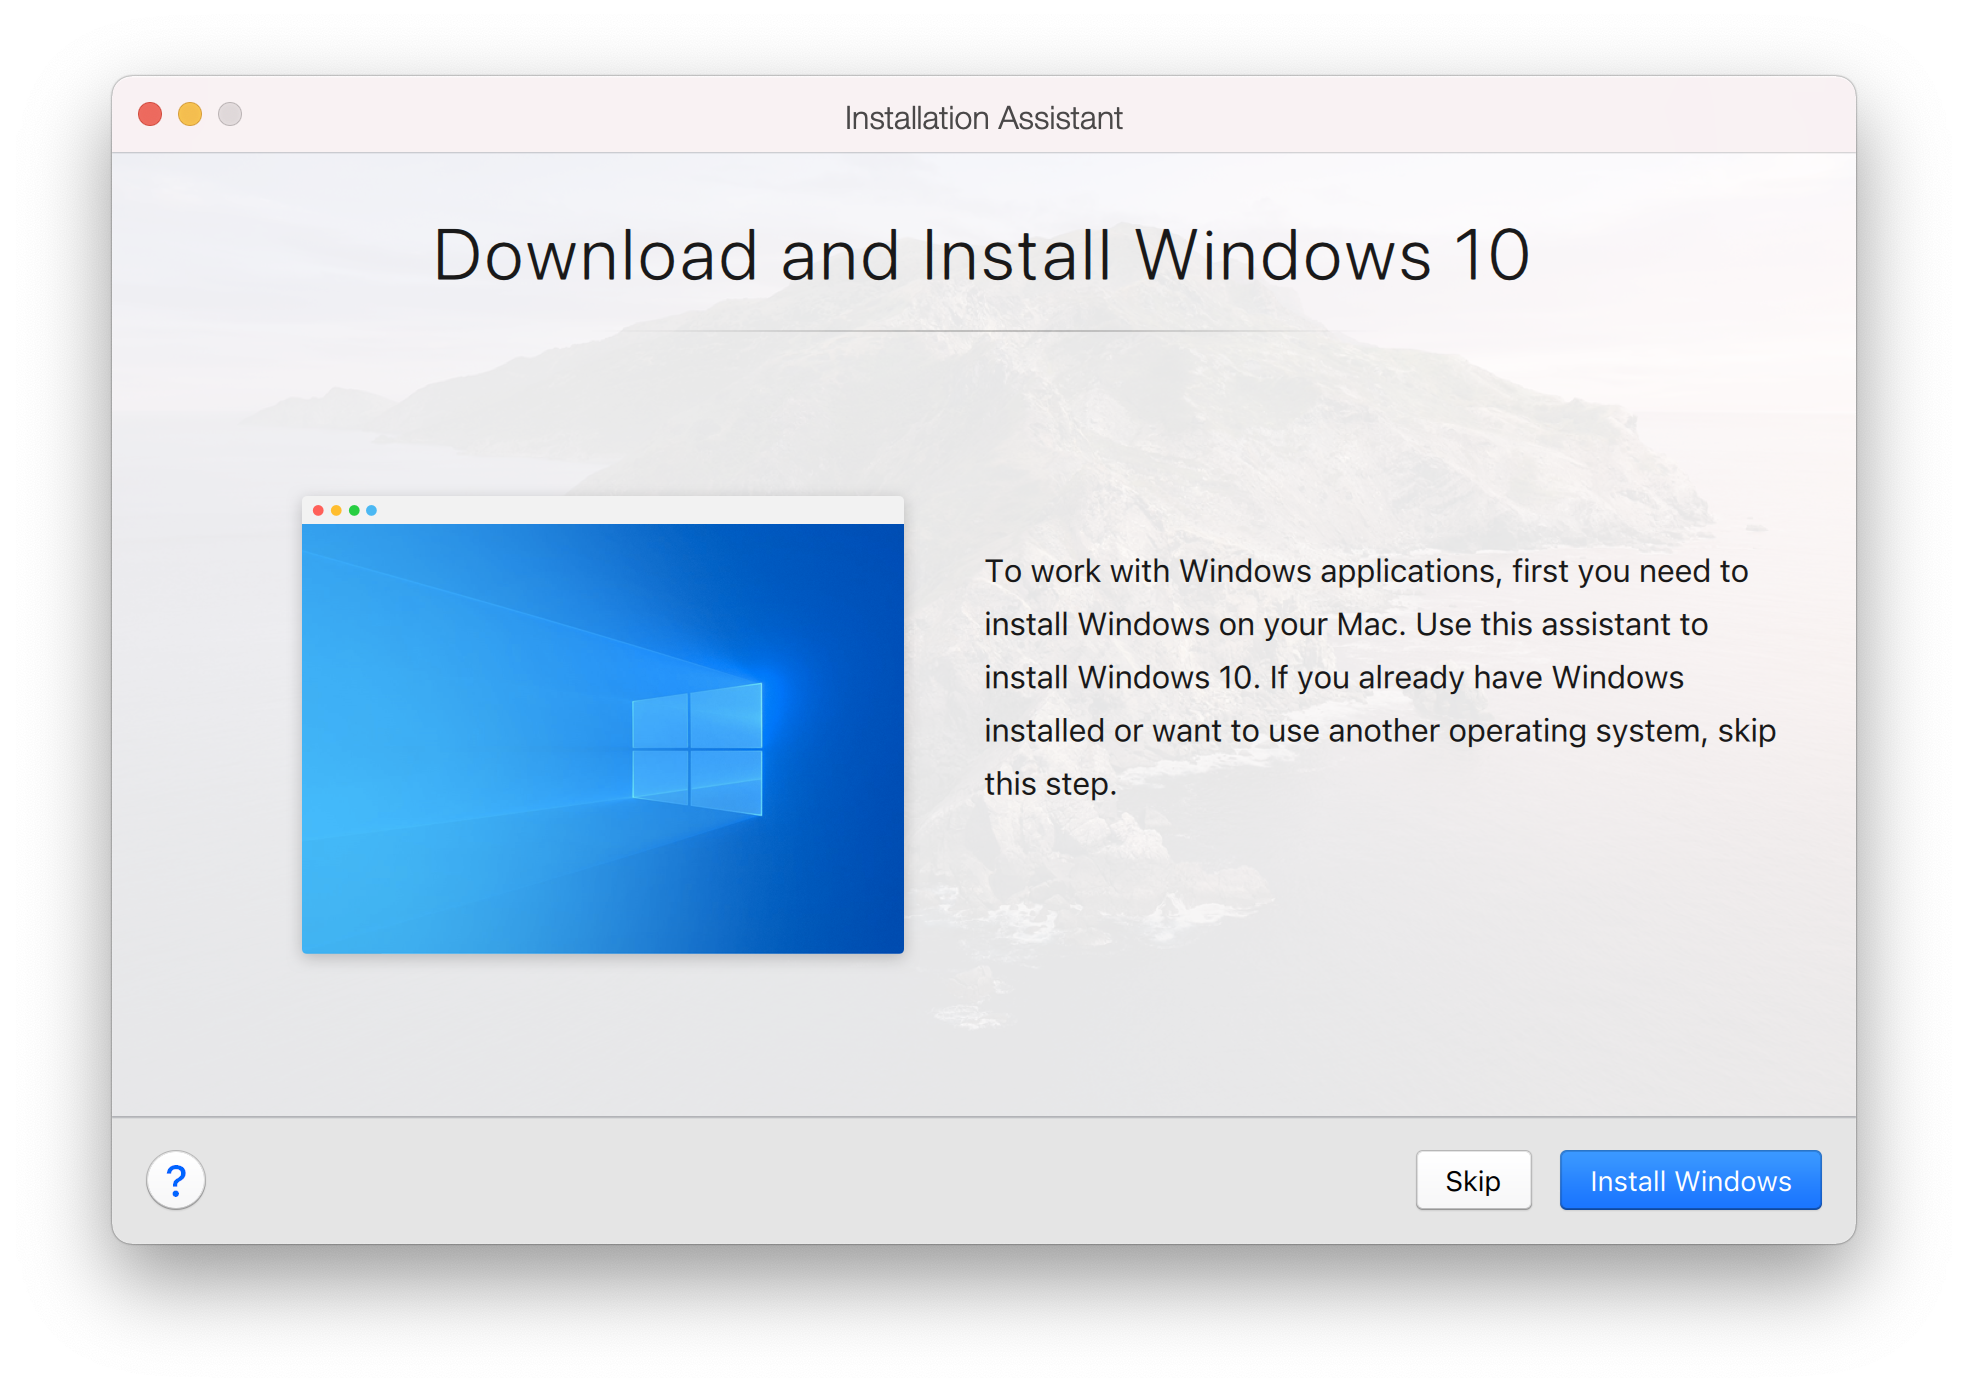 Install Windows on your Mac using Parallels Desktop